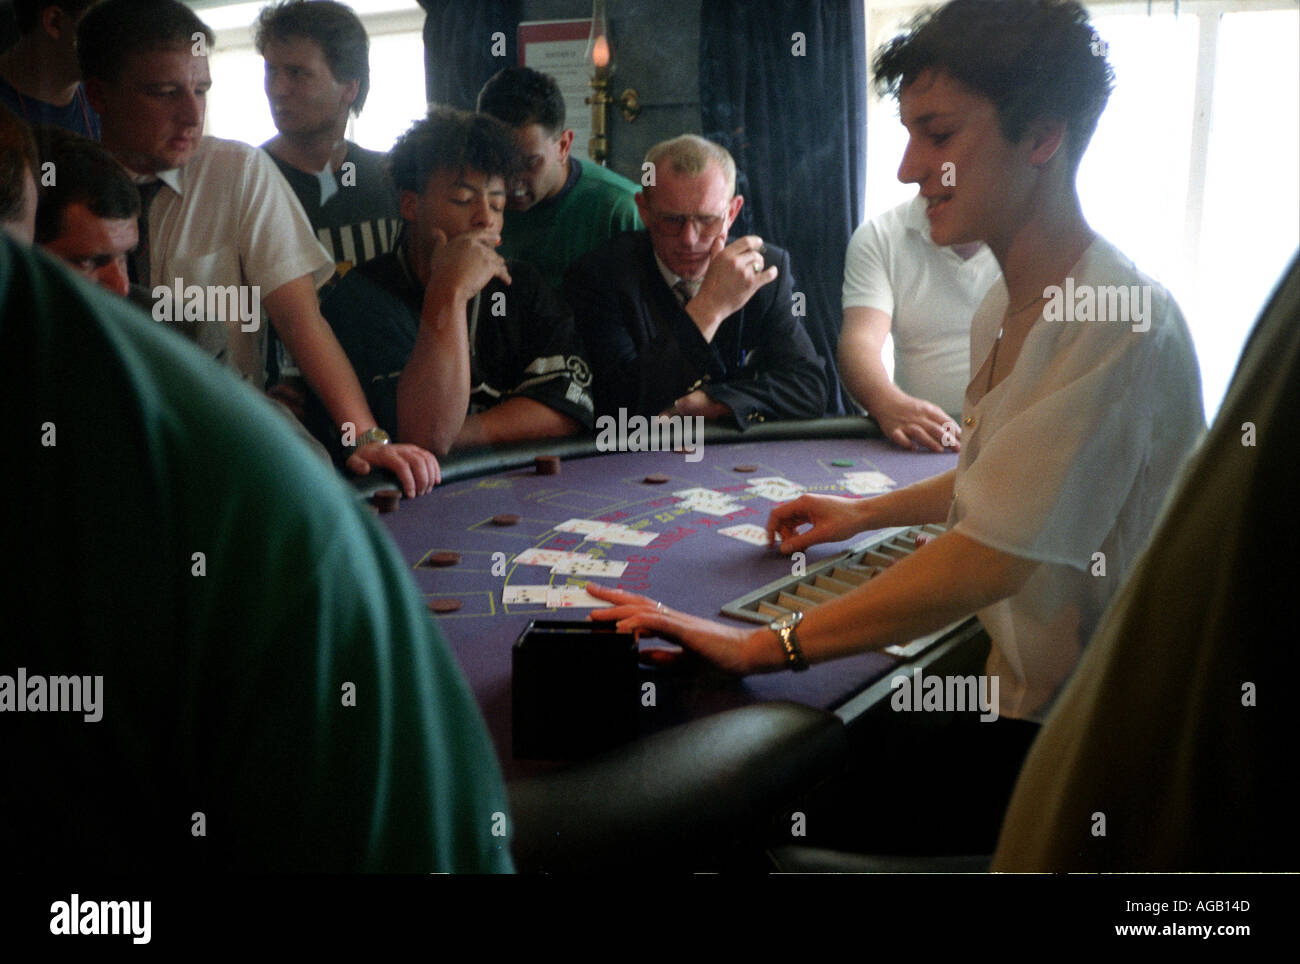 Group of people gambling on board a cross channel ferry. Stock Photo